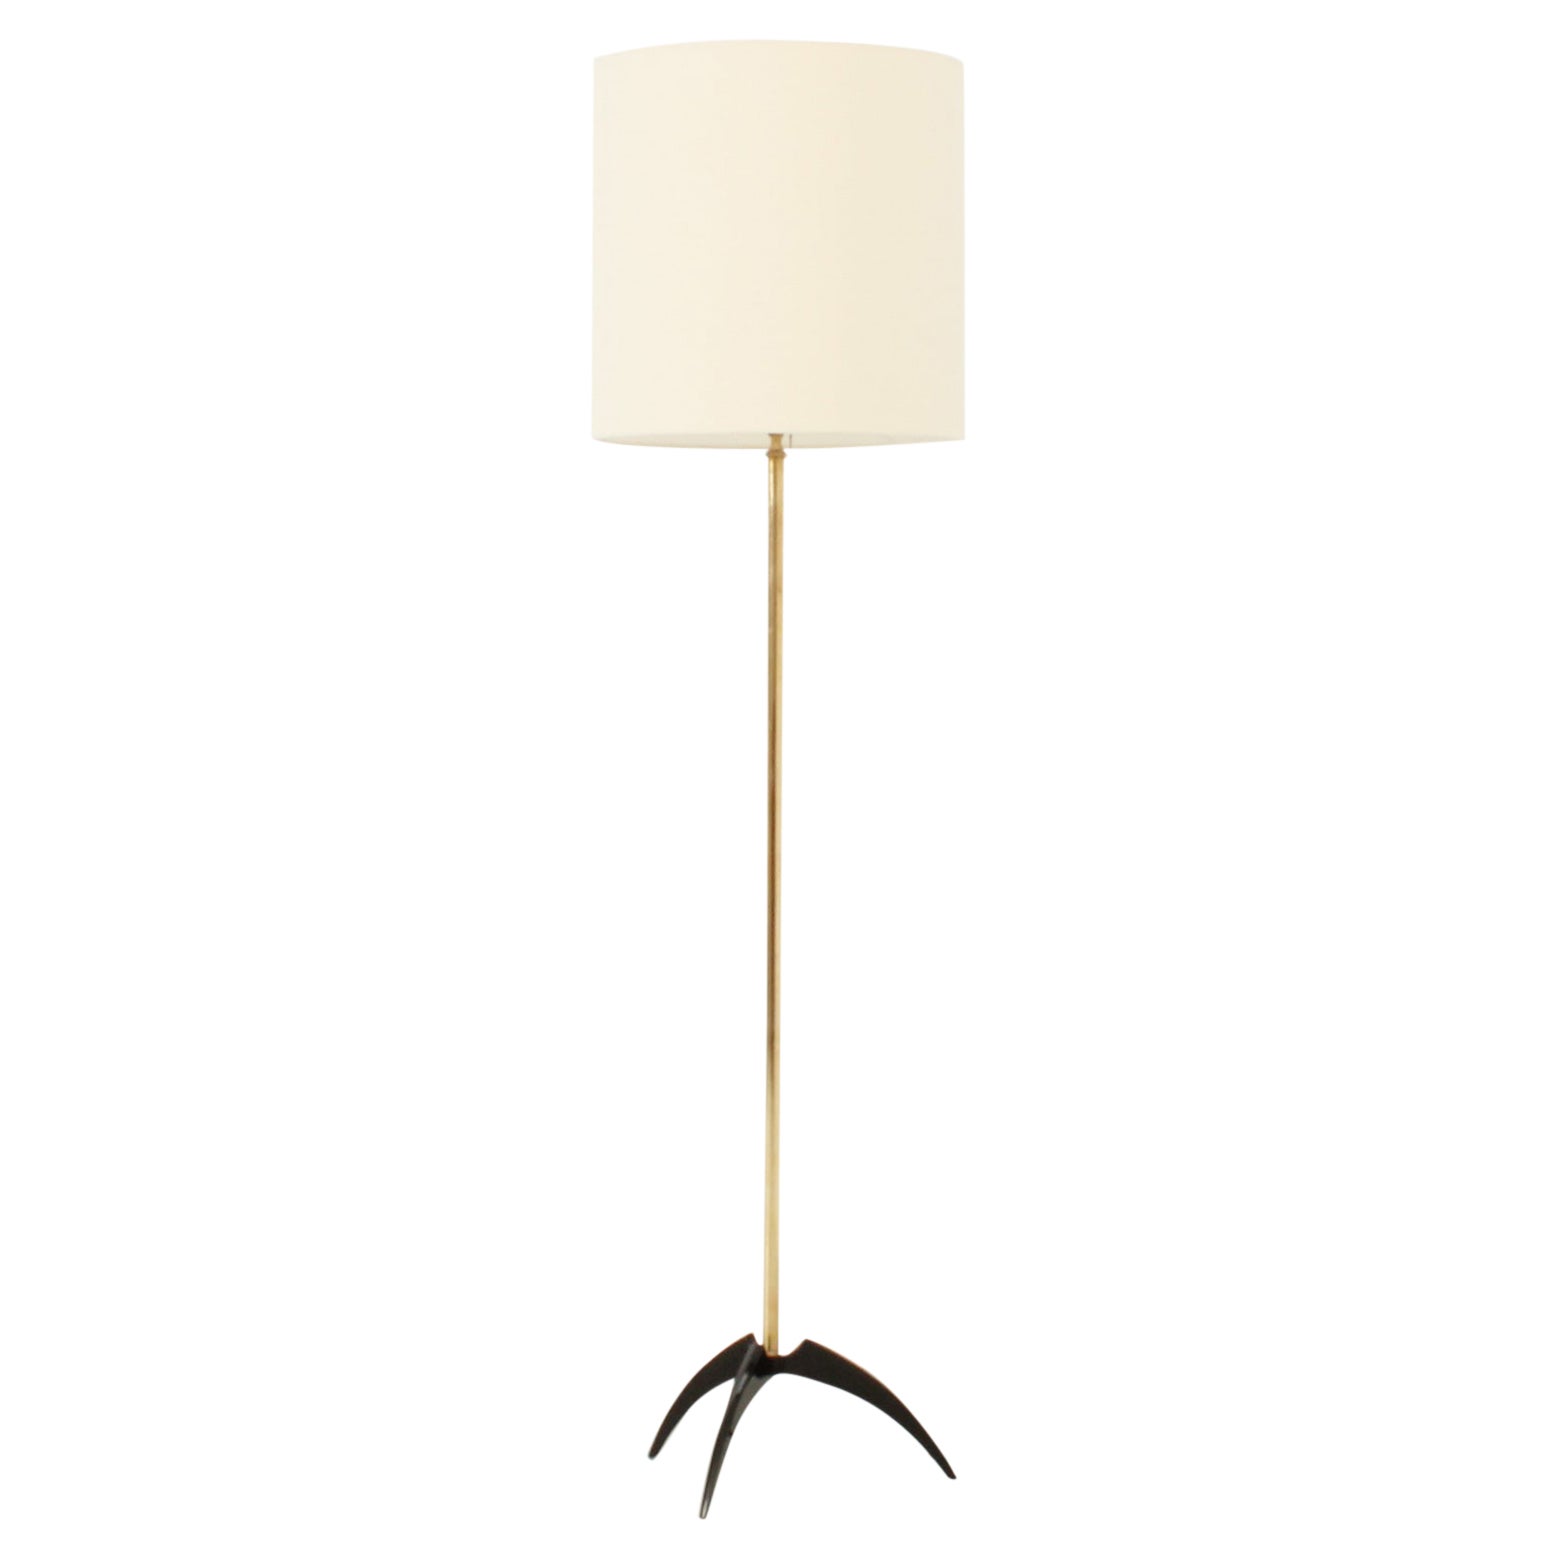 Brass and Lacquered Metal Floor Lamp from 1950's